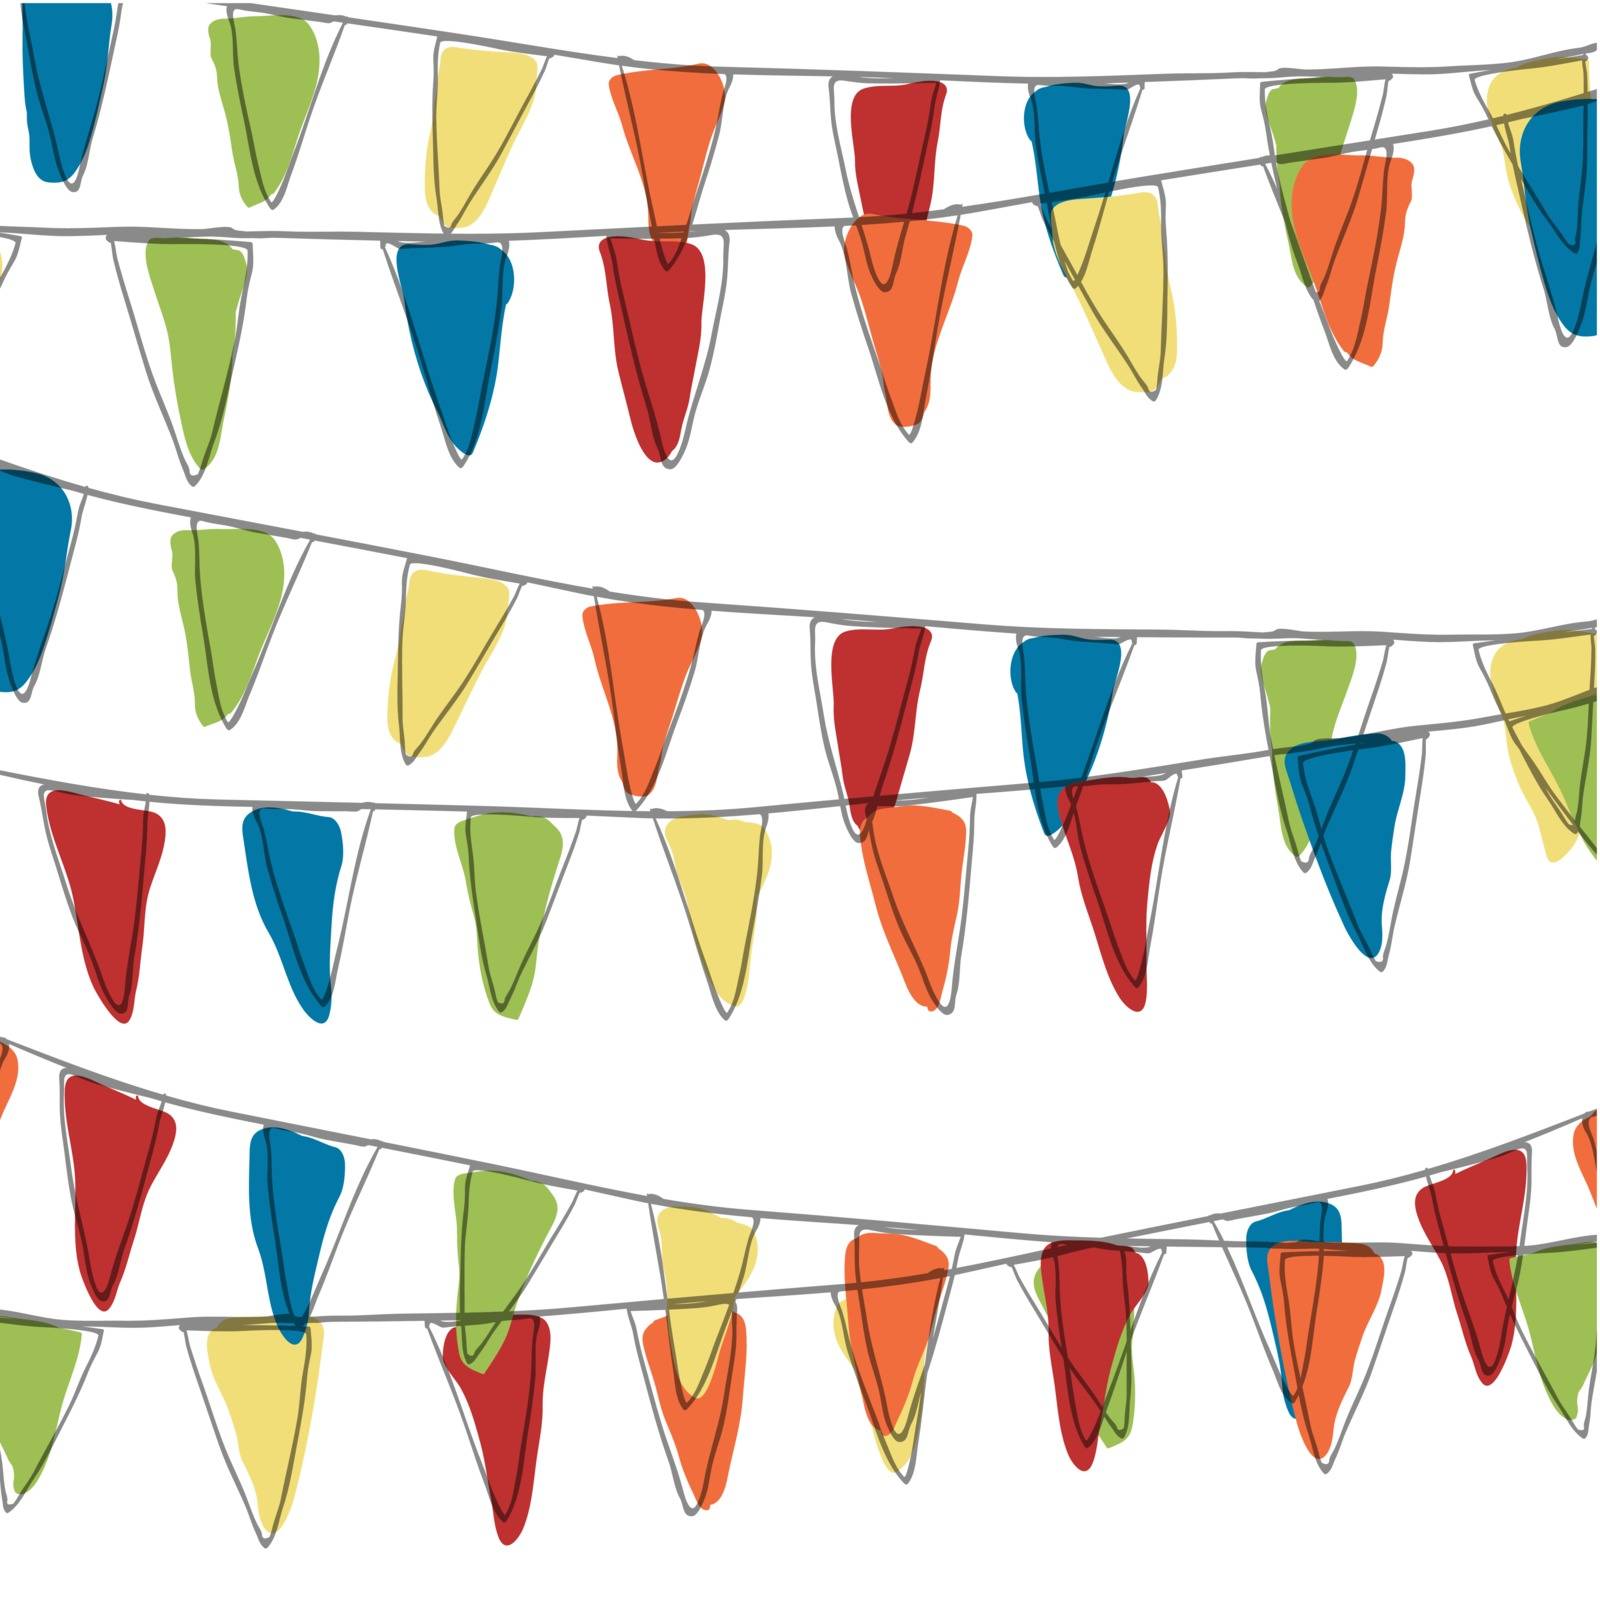 Holidays Pennant Bunting Illustration (Not Seamless) by pashabo